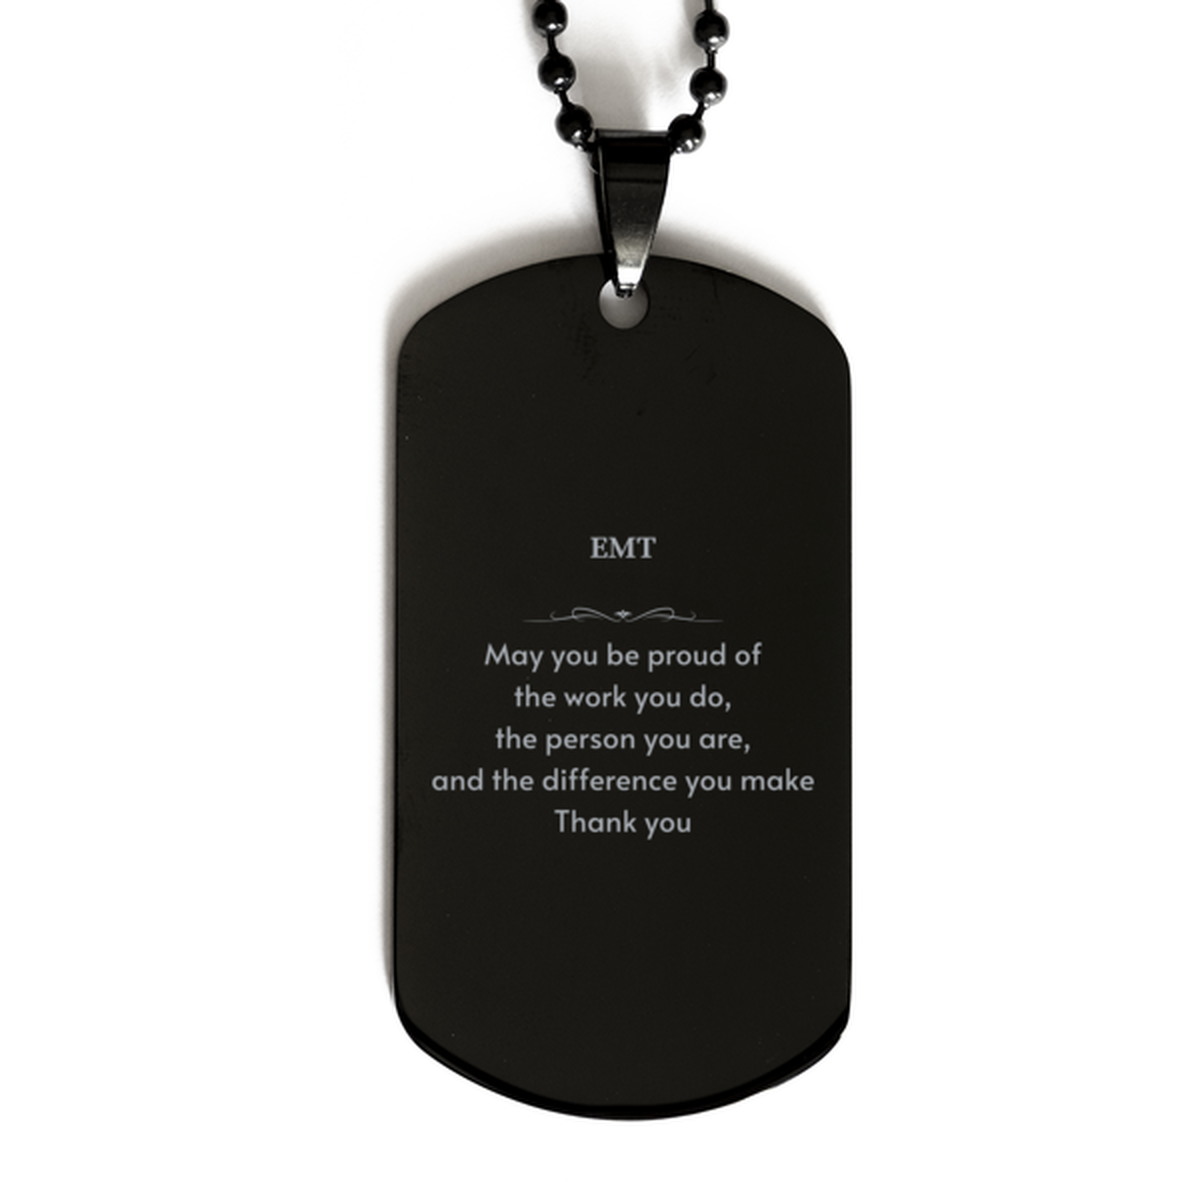 Heartwarming Black Dog Tag Retirement Coworkers Gifts for EMT, EMT May You be proud of the work you do, the person you are Gifts for Boss Men Women Friends